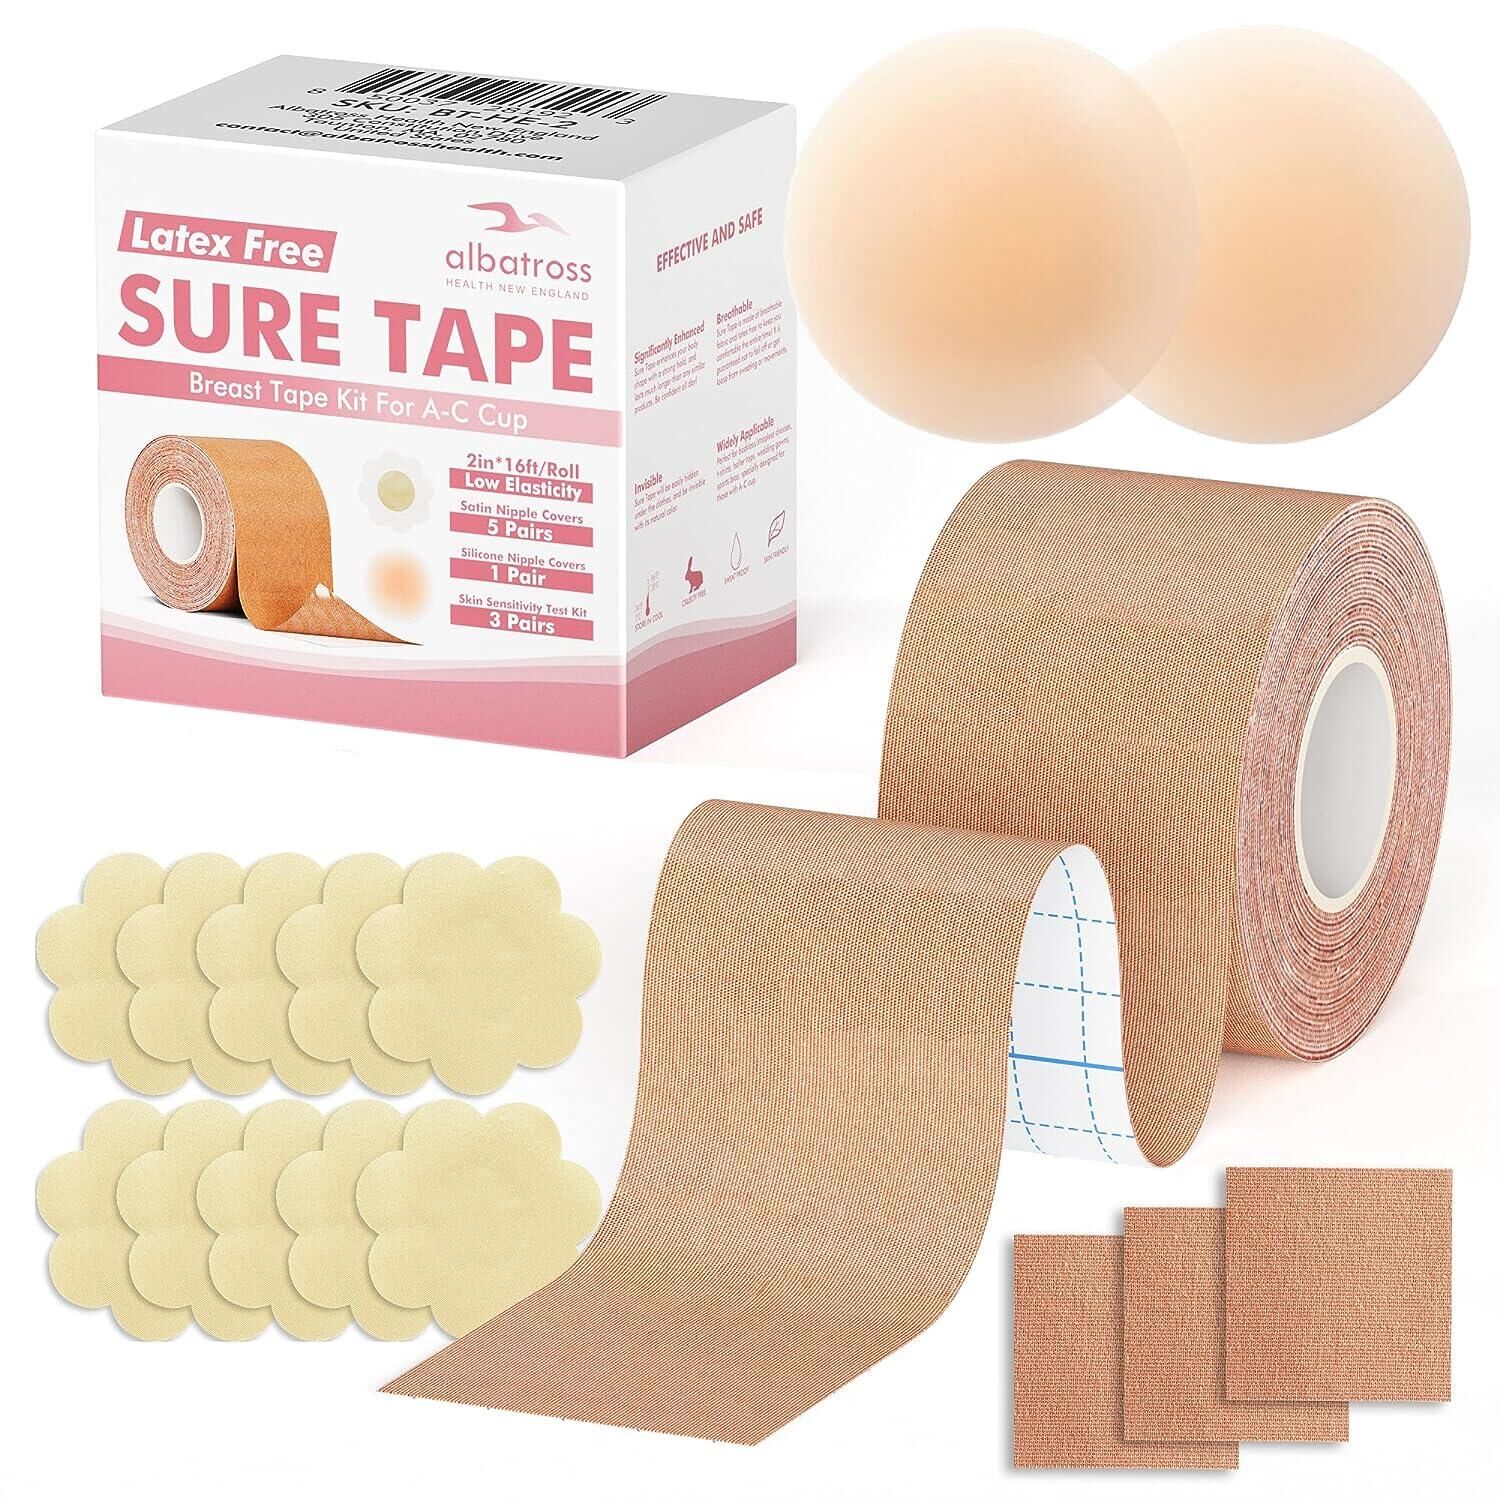 The Tape Roll - 1st AC Kit - Part 3 